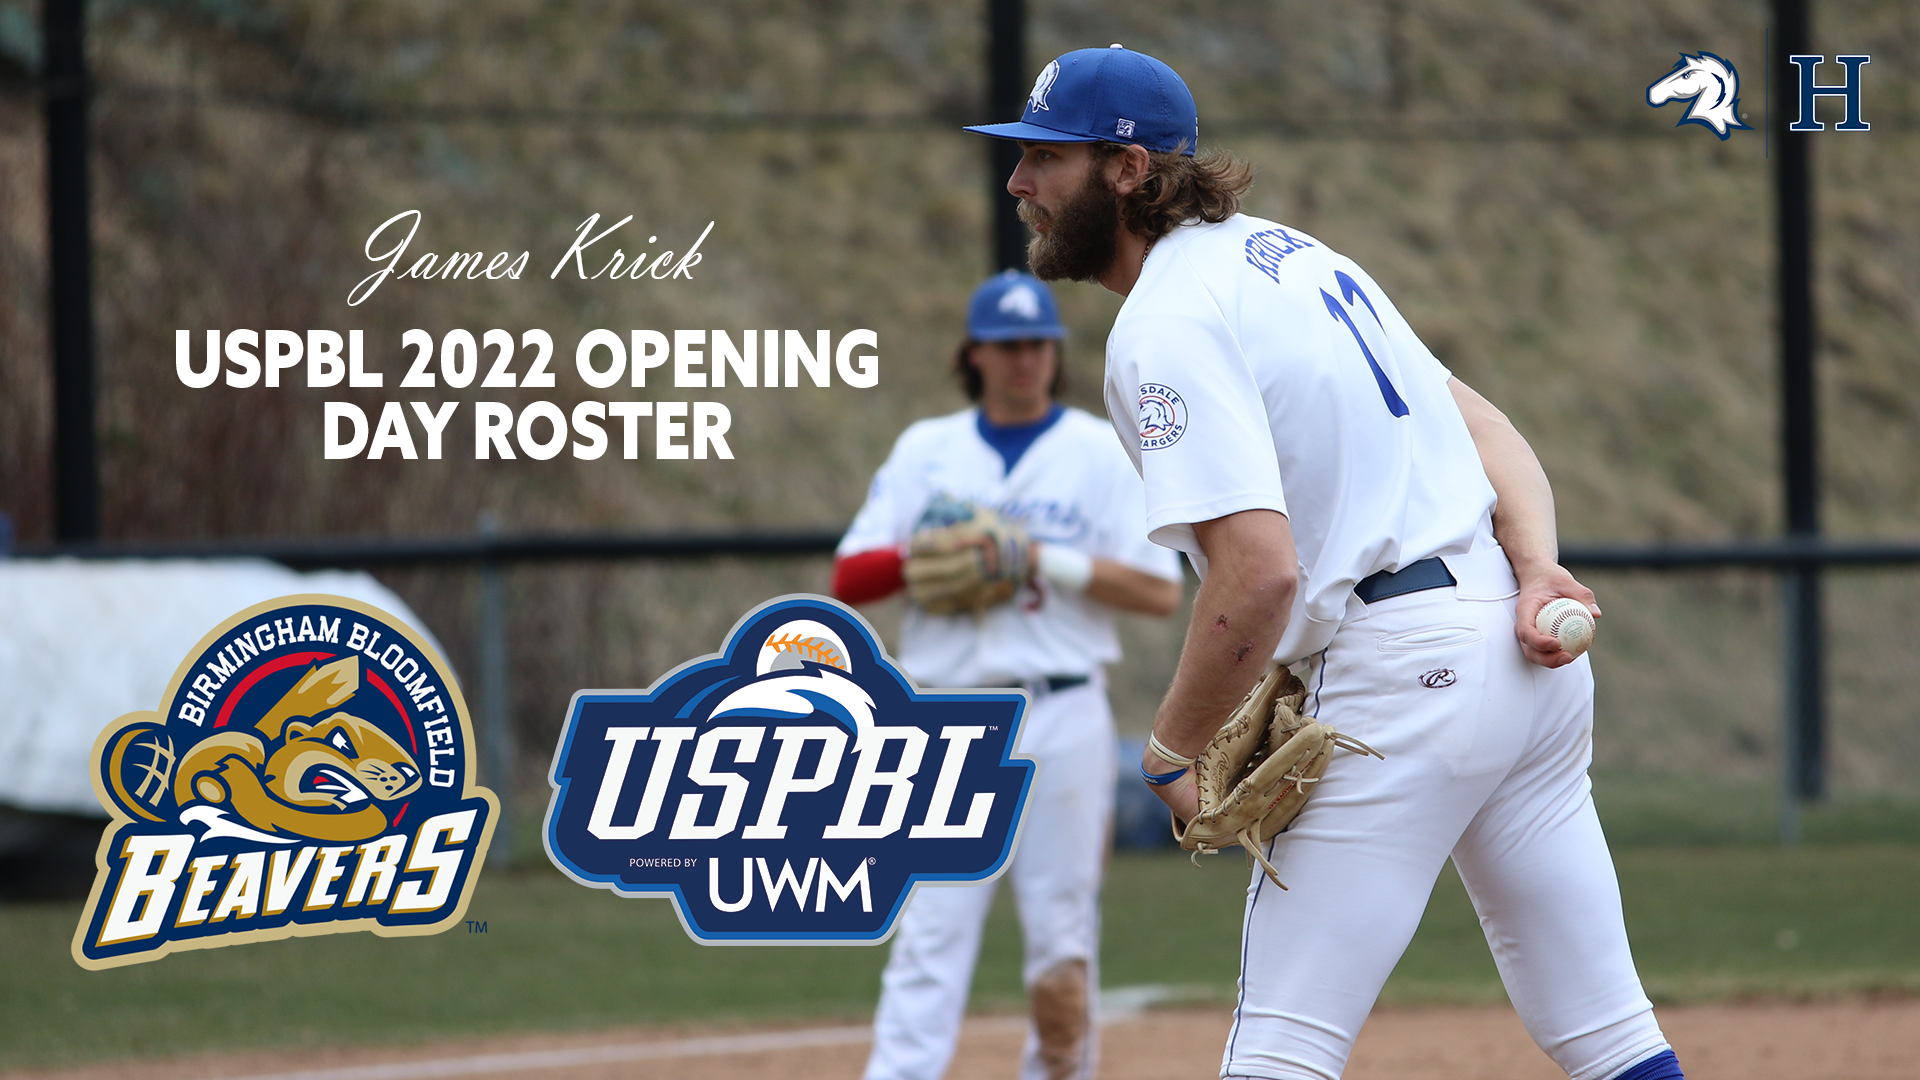 Charger alum James Krick signs with USPBL club for summer season